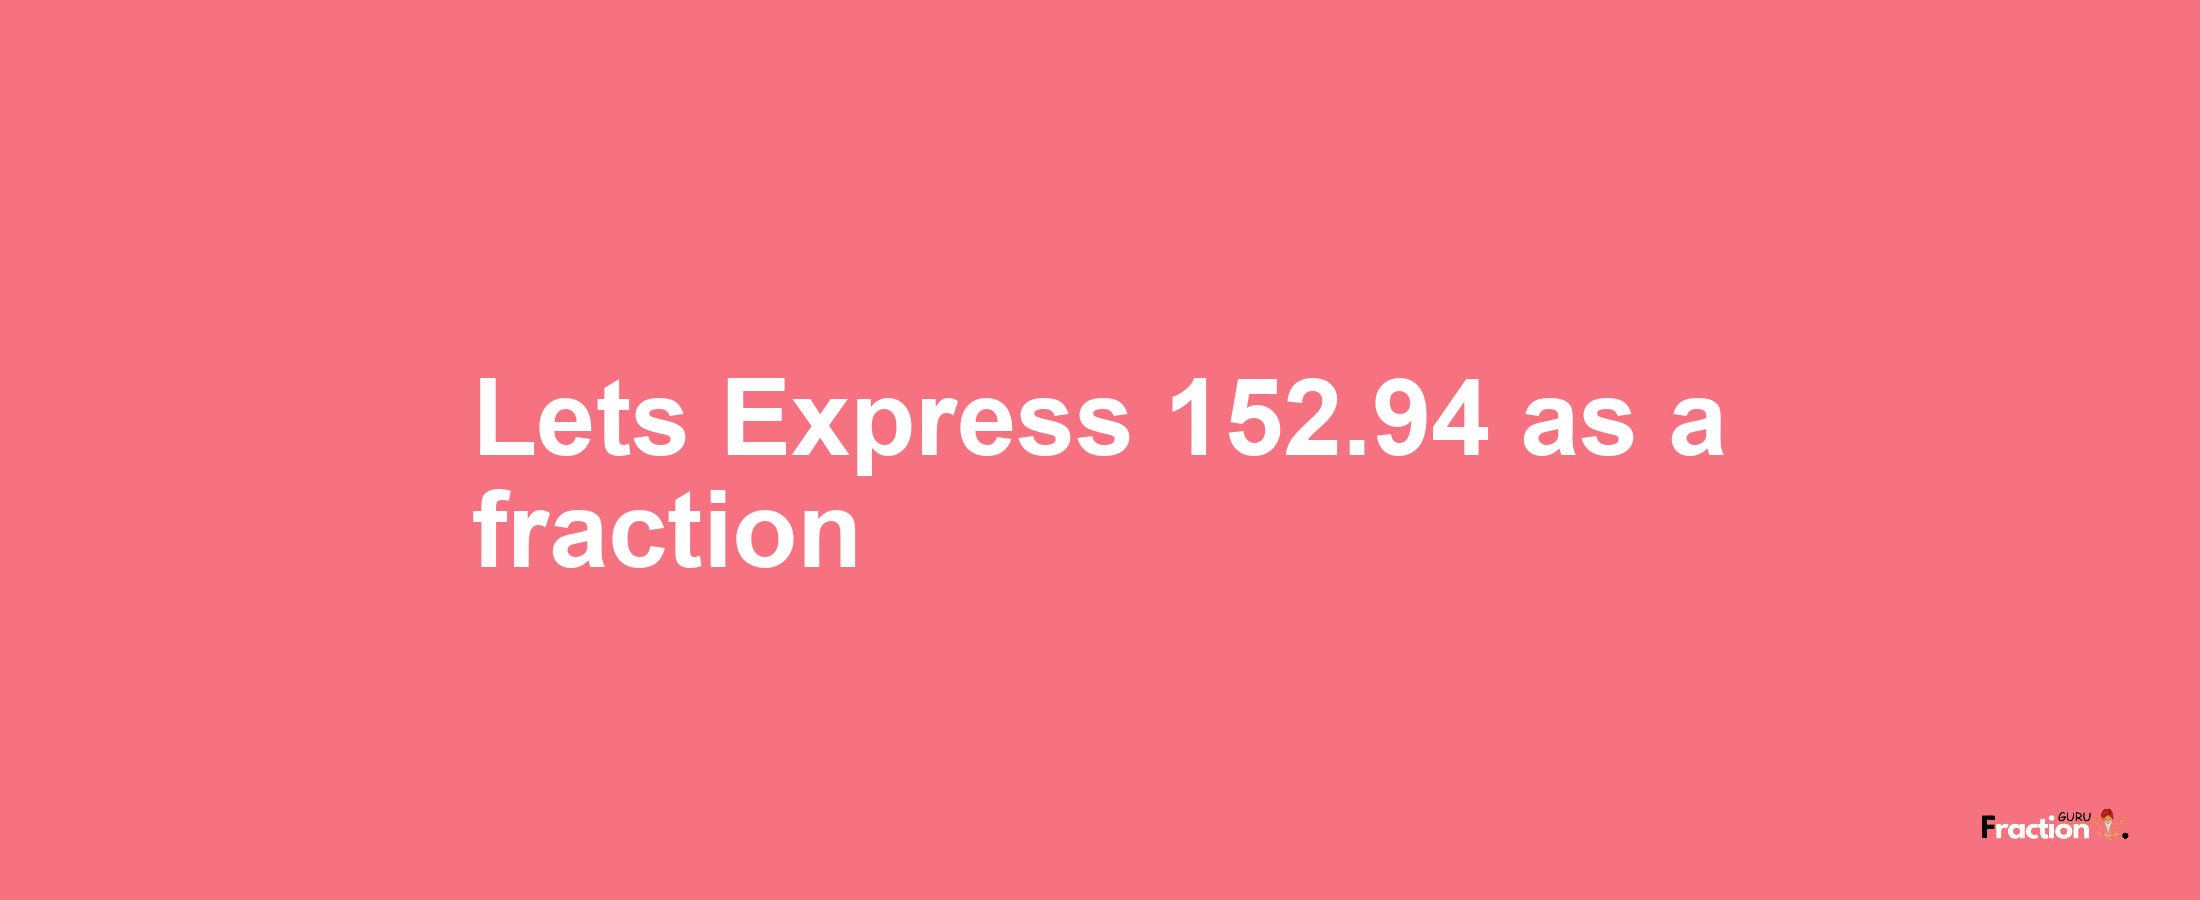 Lets Express 152.94 as afraction